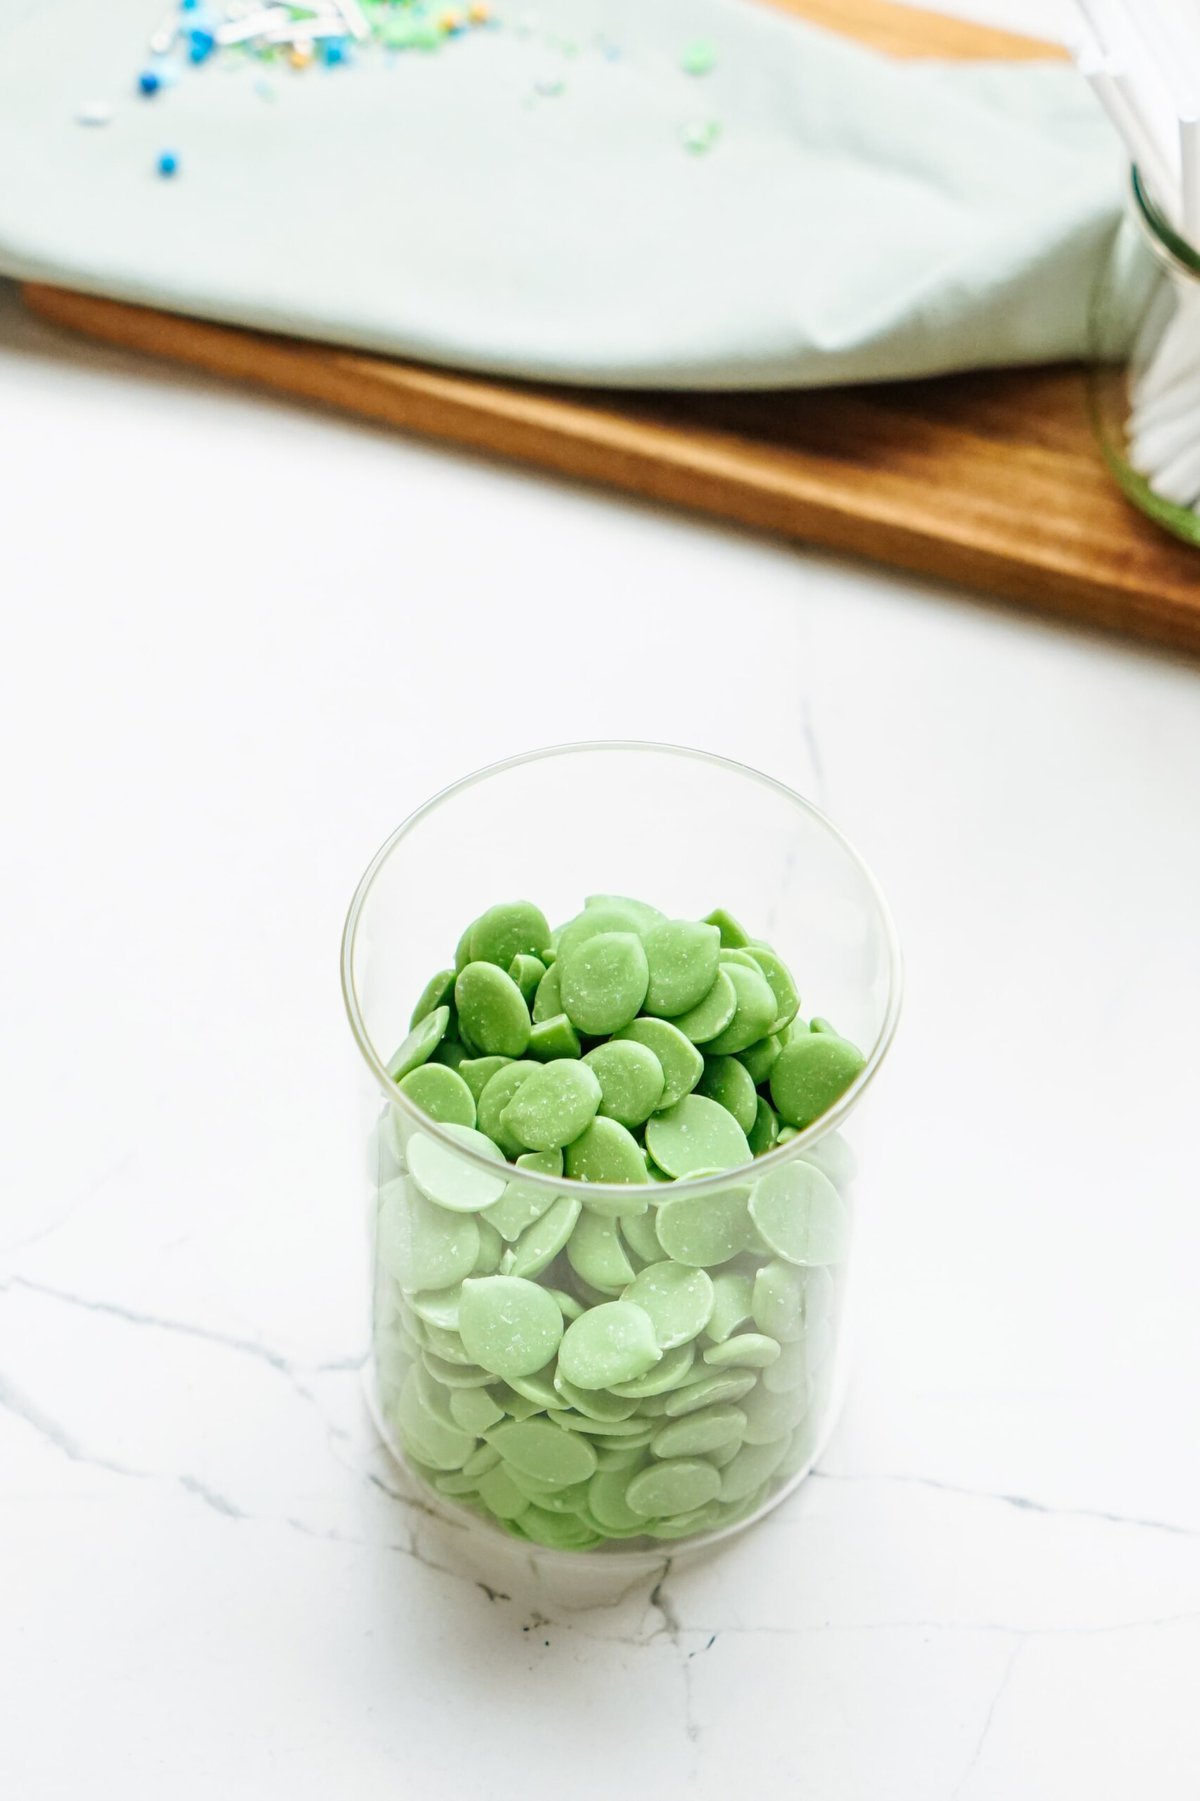 Green chocolate wafer melts in a glass bowl.